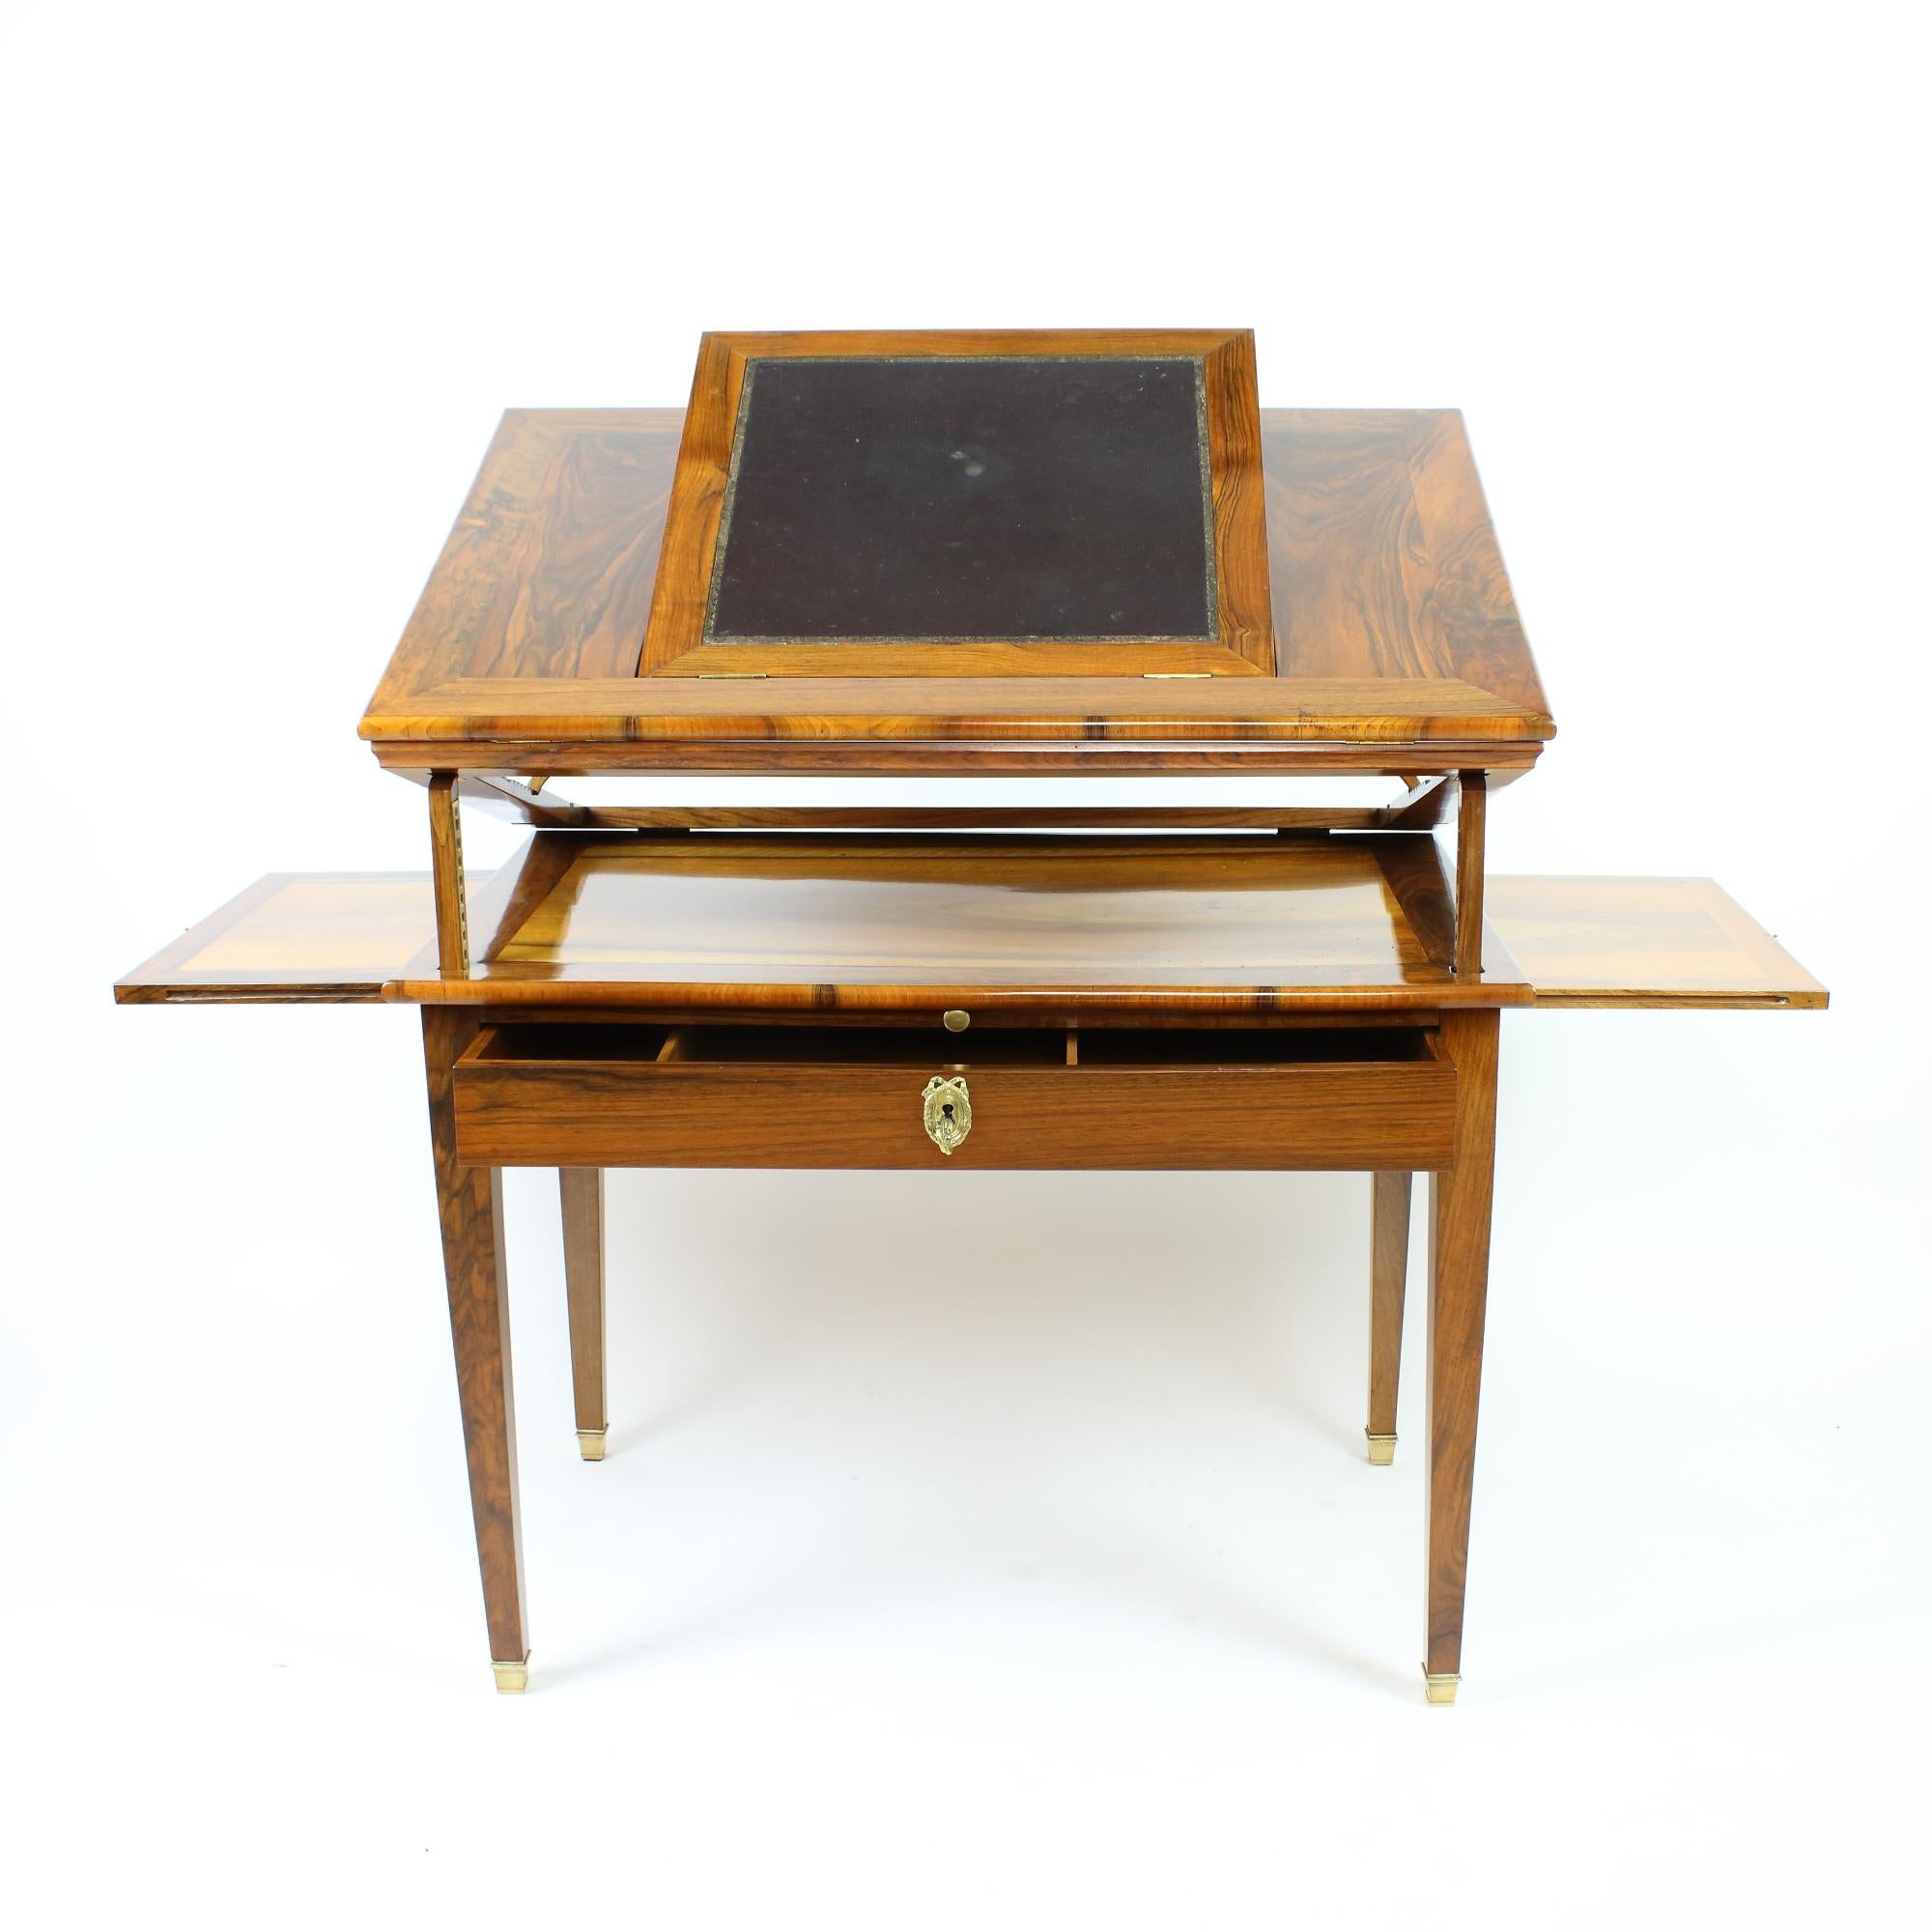 A late 18th century Louis XVI walnut architect's or mechanical table with a double-hinged ratcheted top comprising an original gold-tooled black leather lined writing plate, which can be changed in position, veneered in walnut of beautiful warm